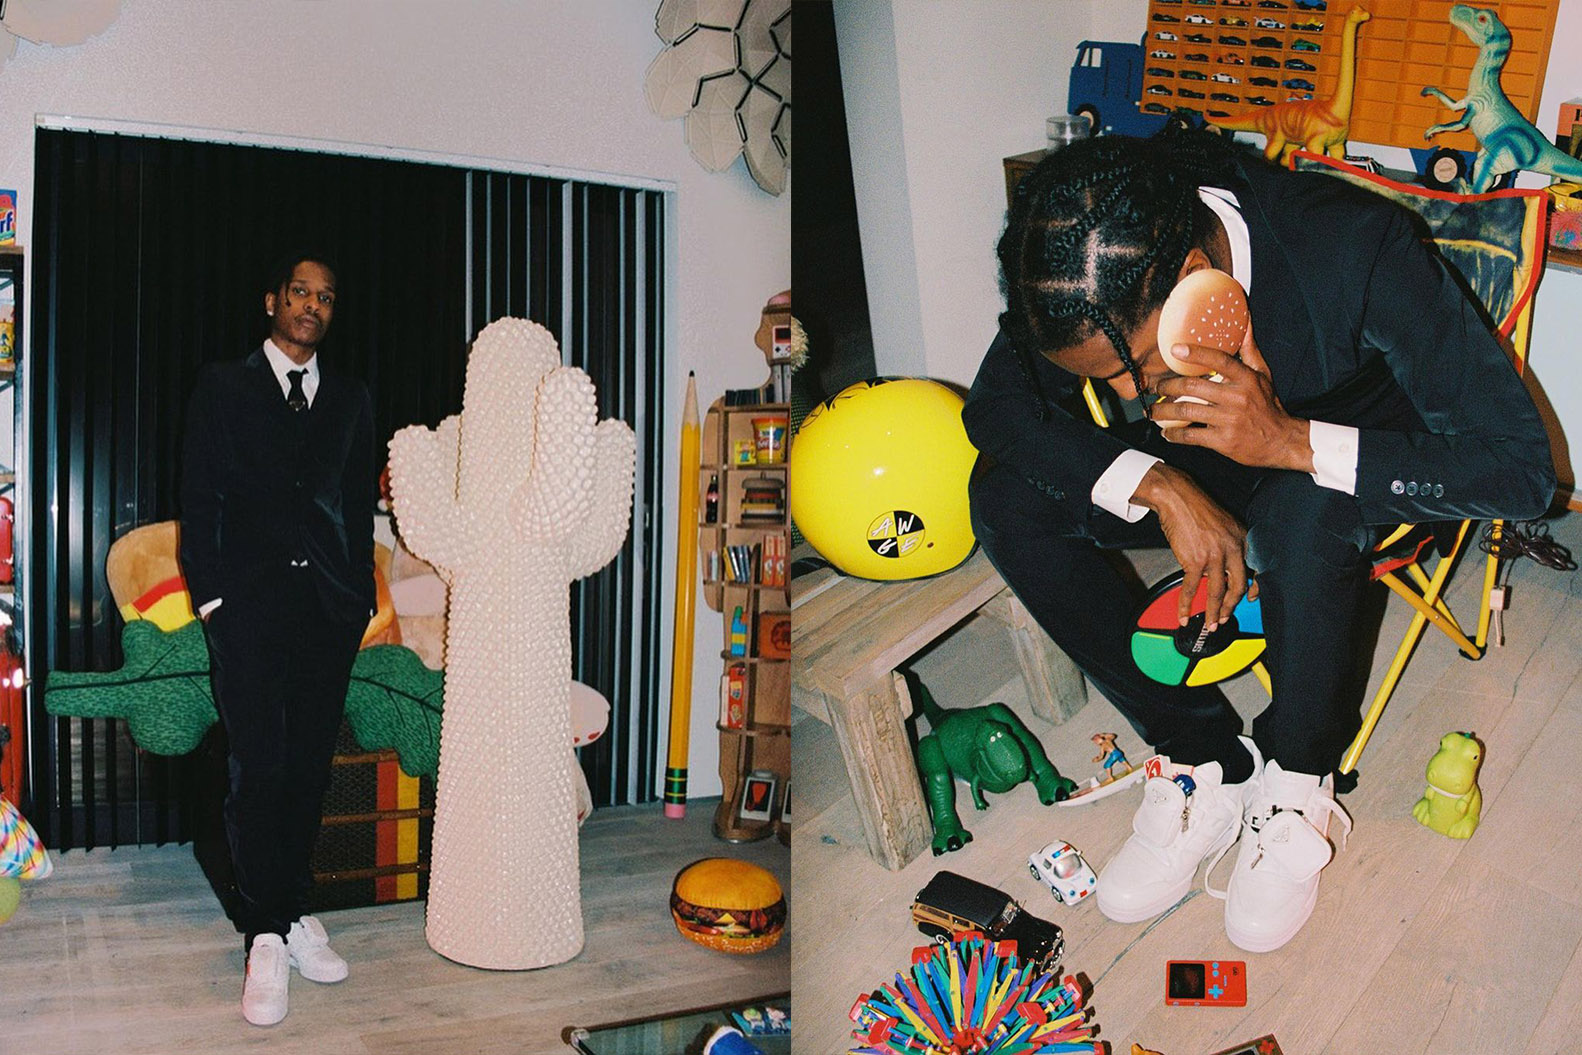 METCHA  A$AP Rocky's teaser of the forthcoming Prada x adidas collab.